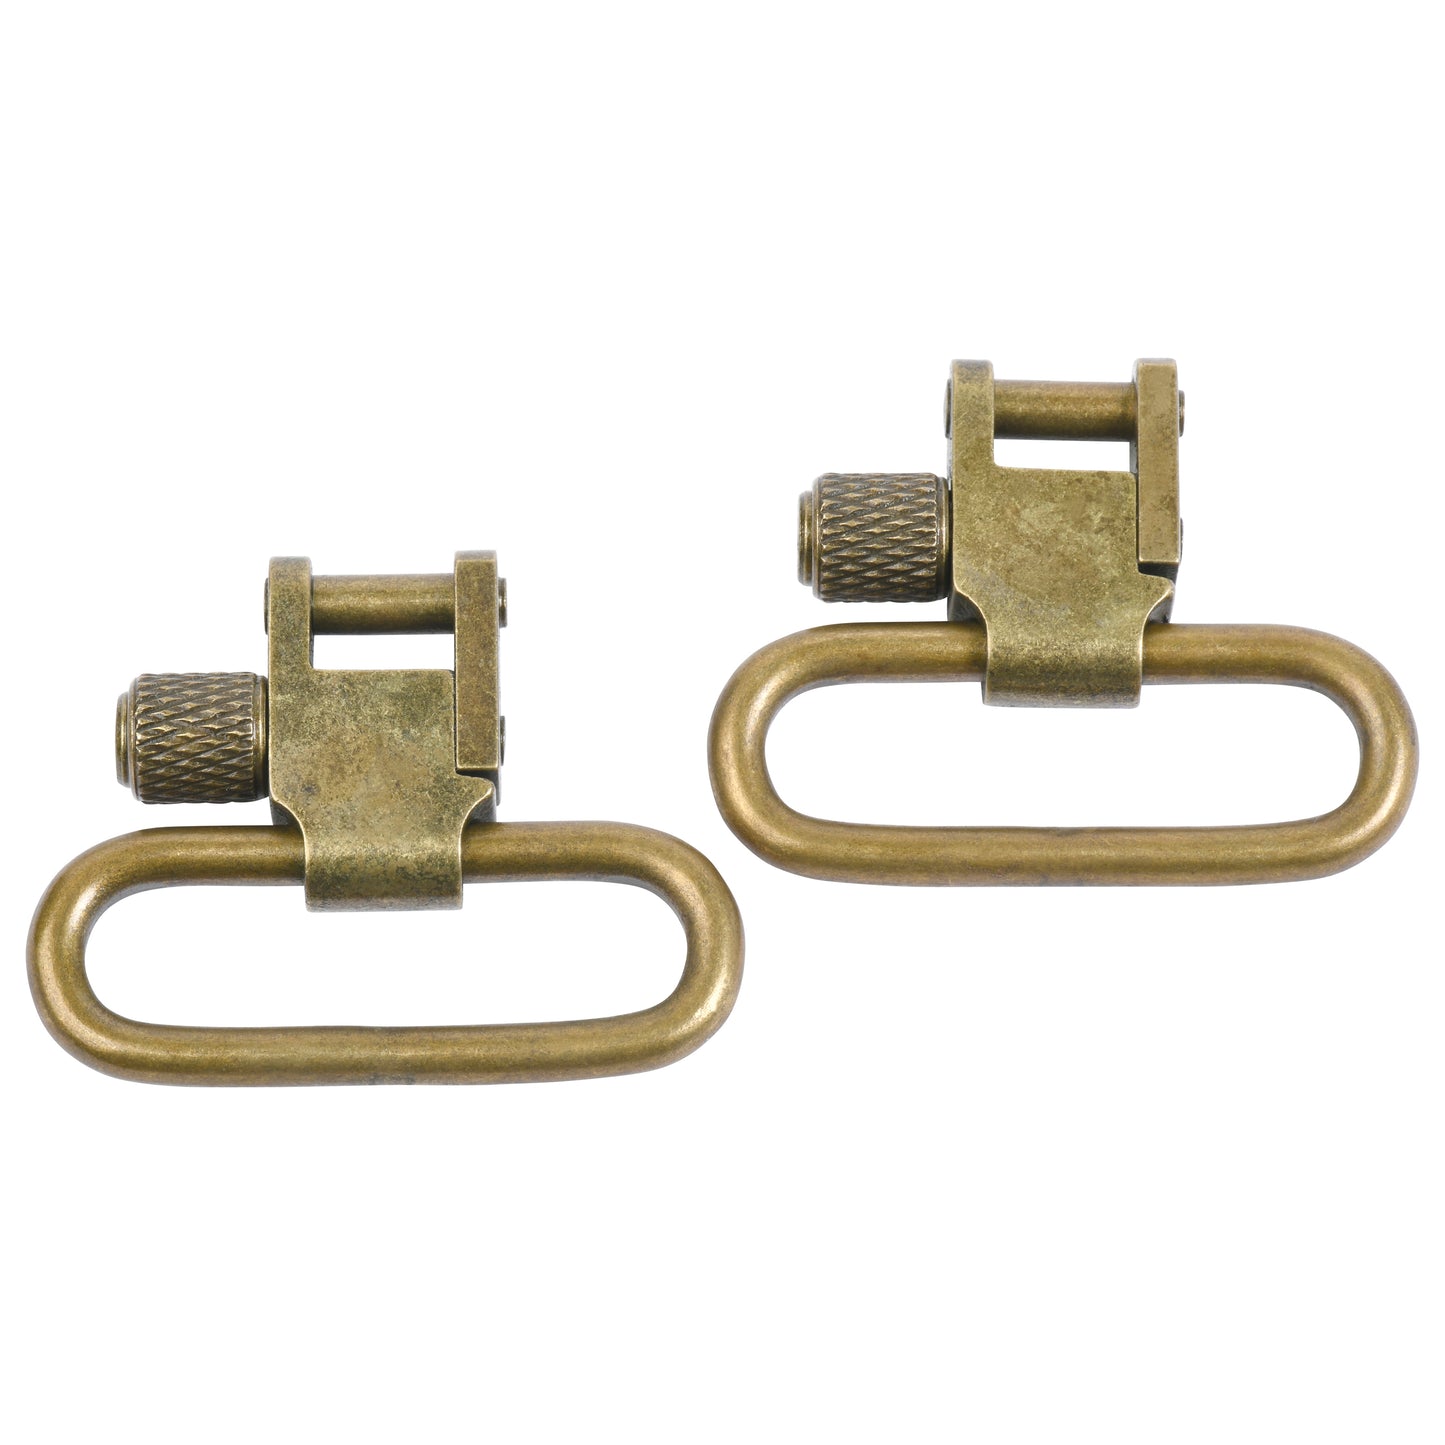 Antique Brass Finish Steel Gun Sling Swivels  Available in 1 Inch or 1.25 Inch Widths (Price includes shipping)